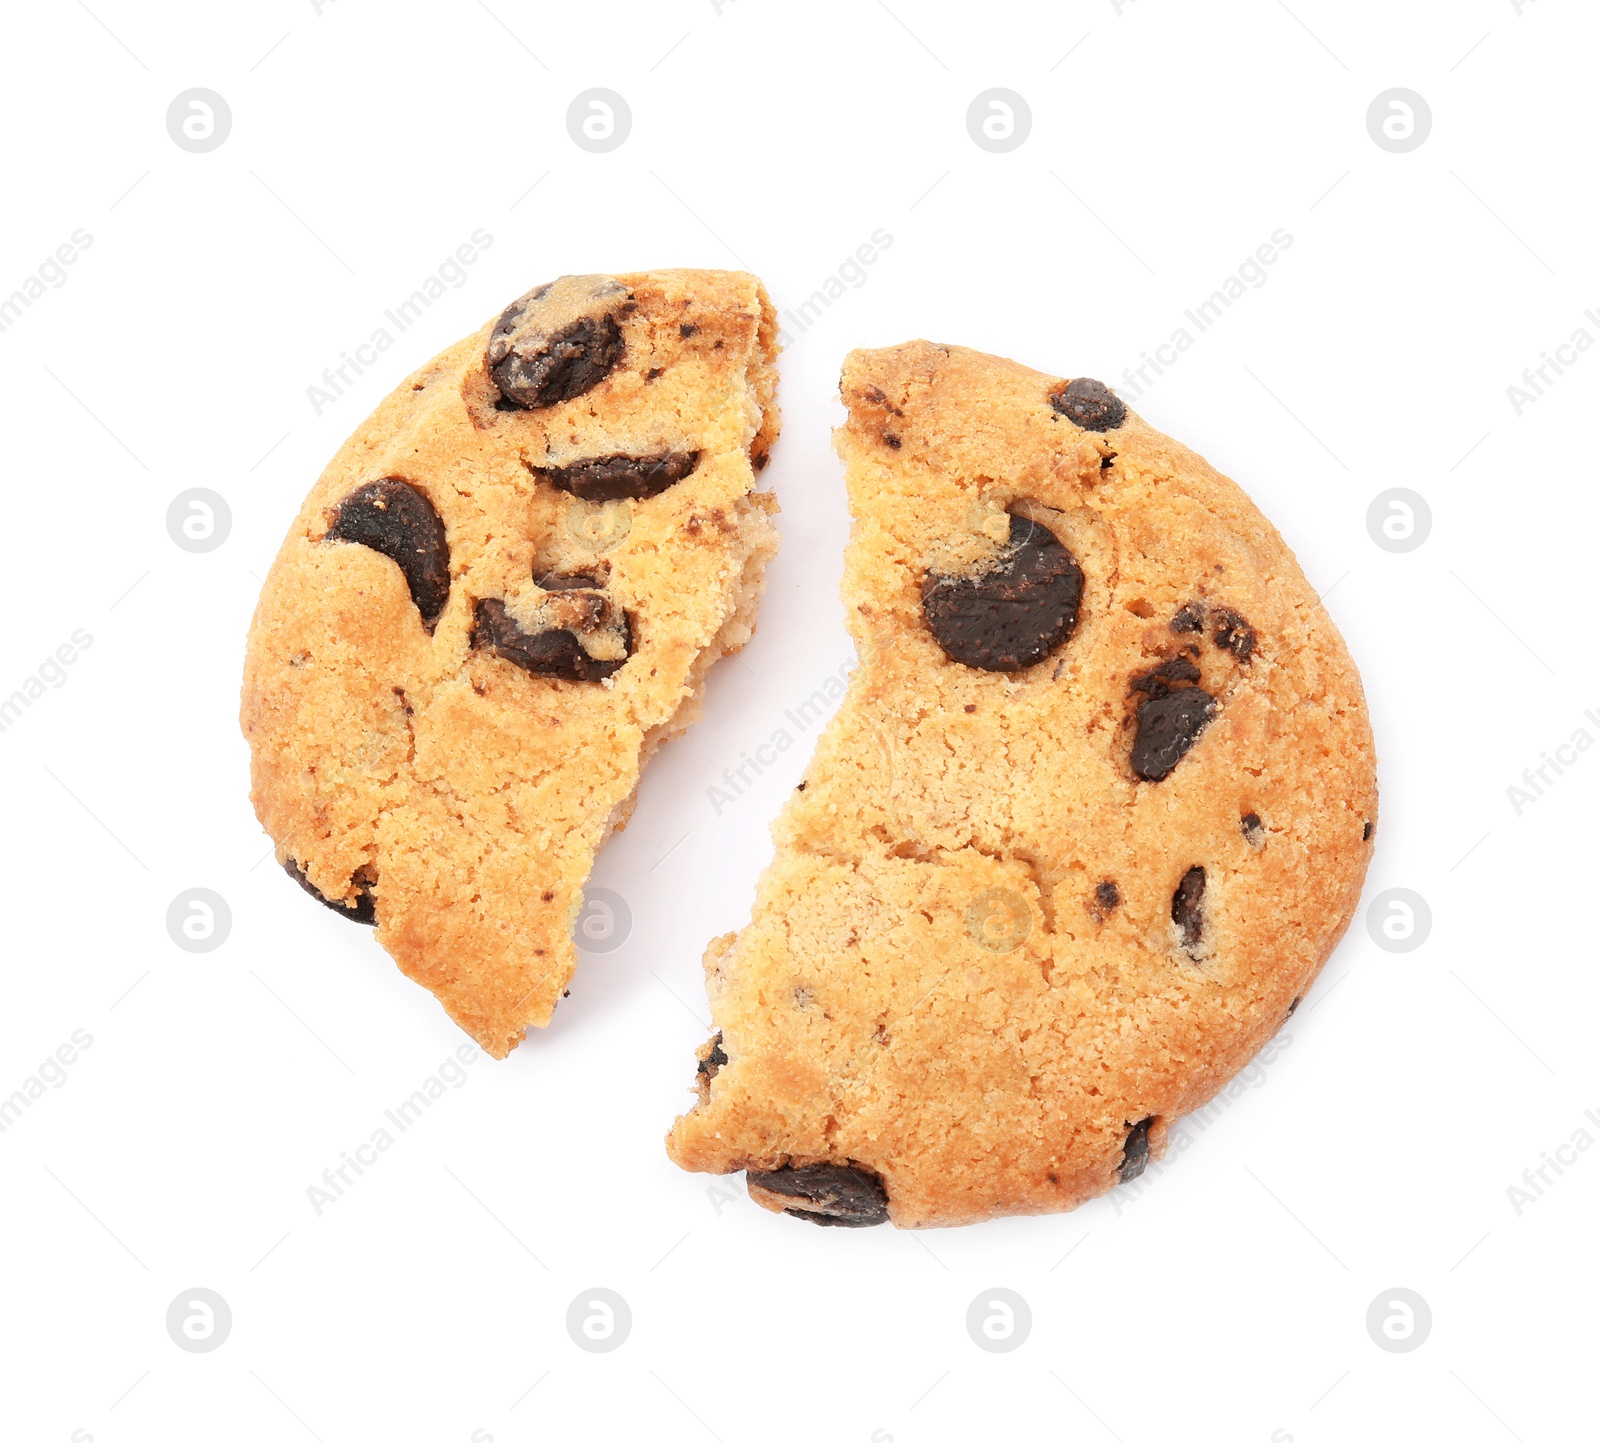 Photo of Tasty chocolate chip cookie on white background